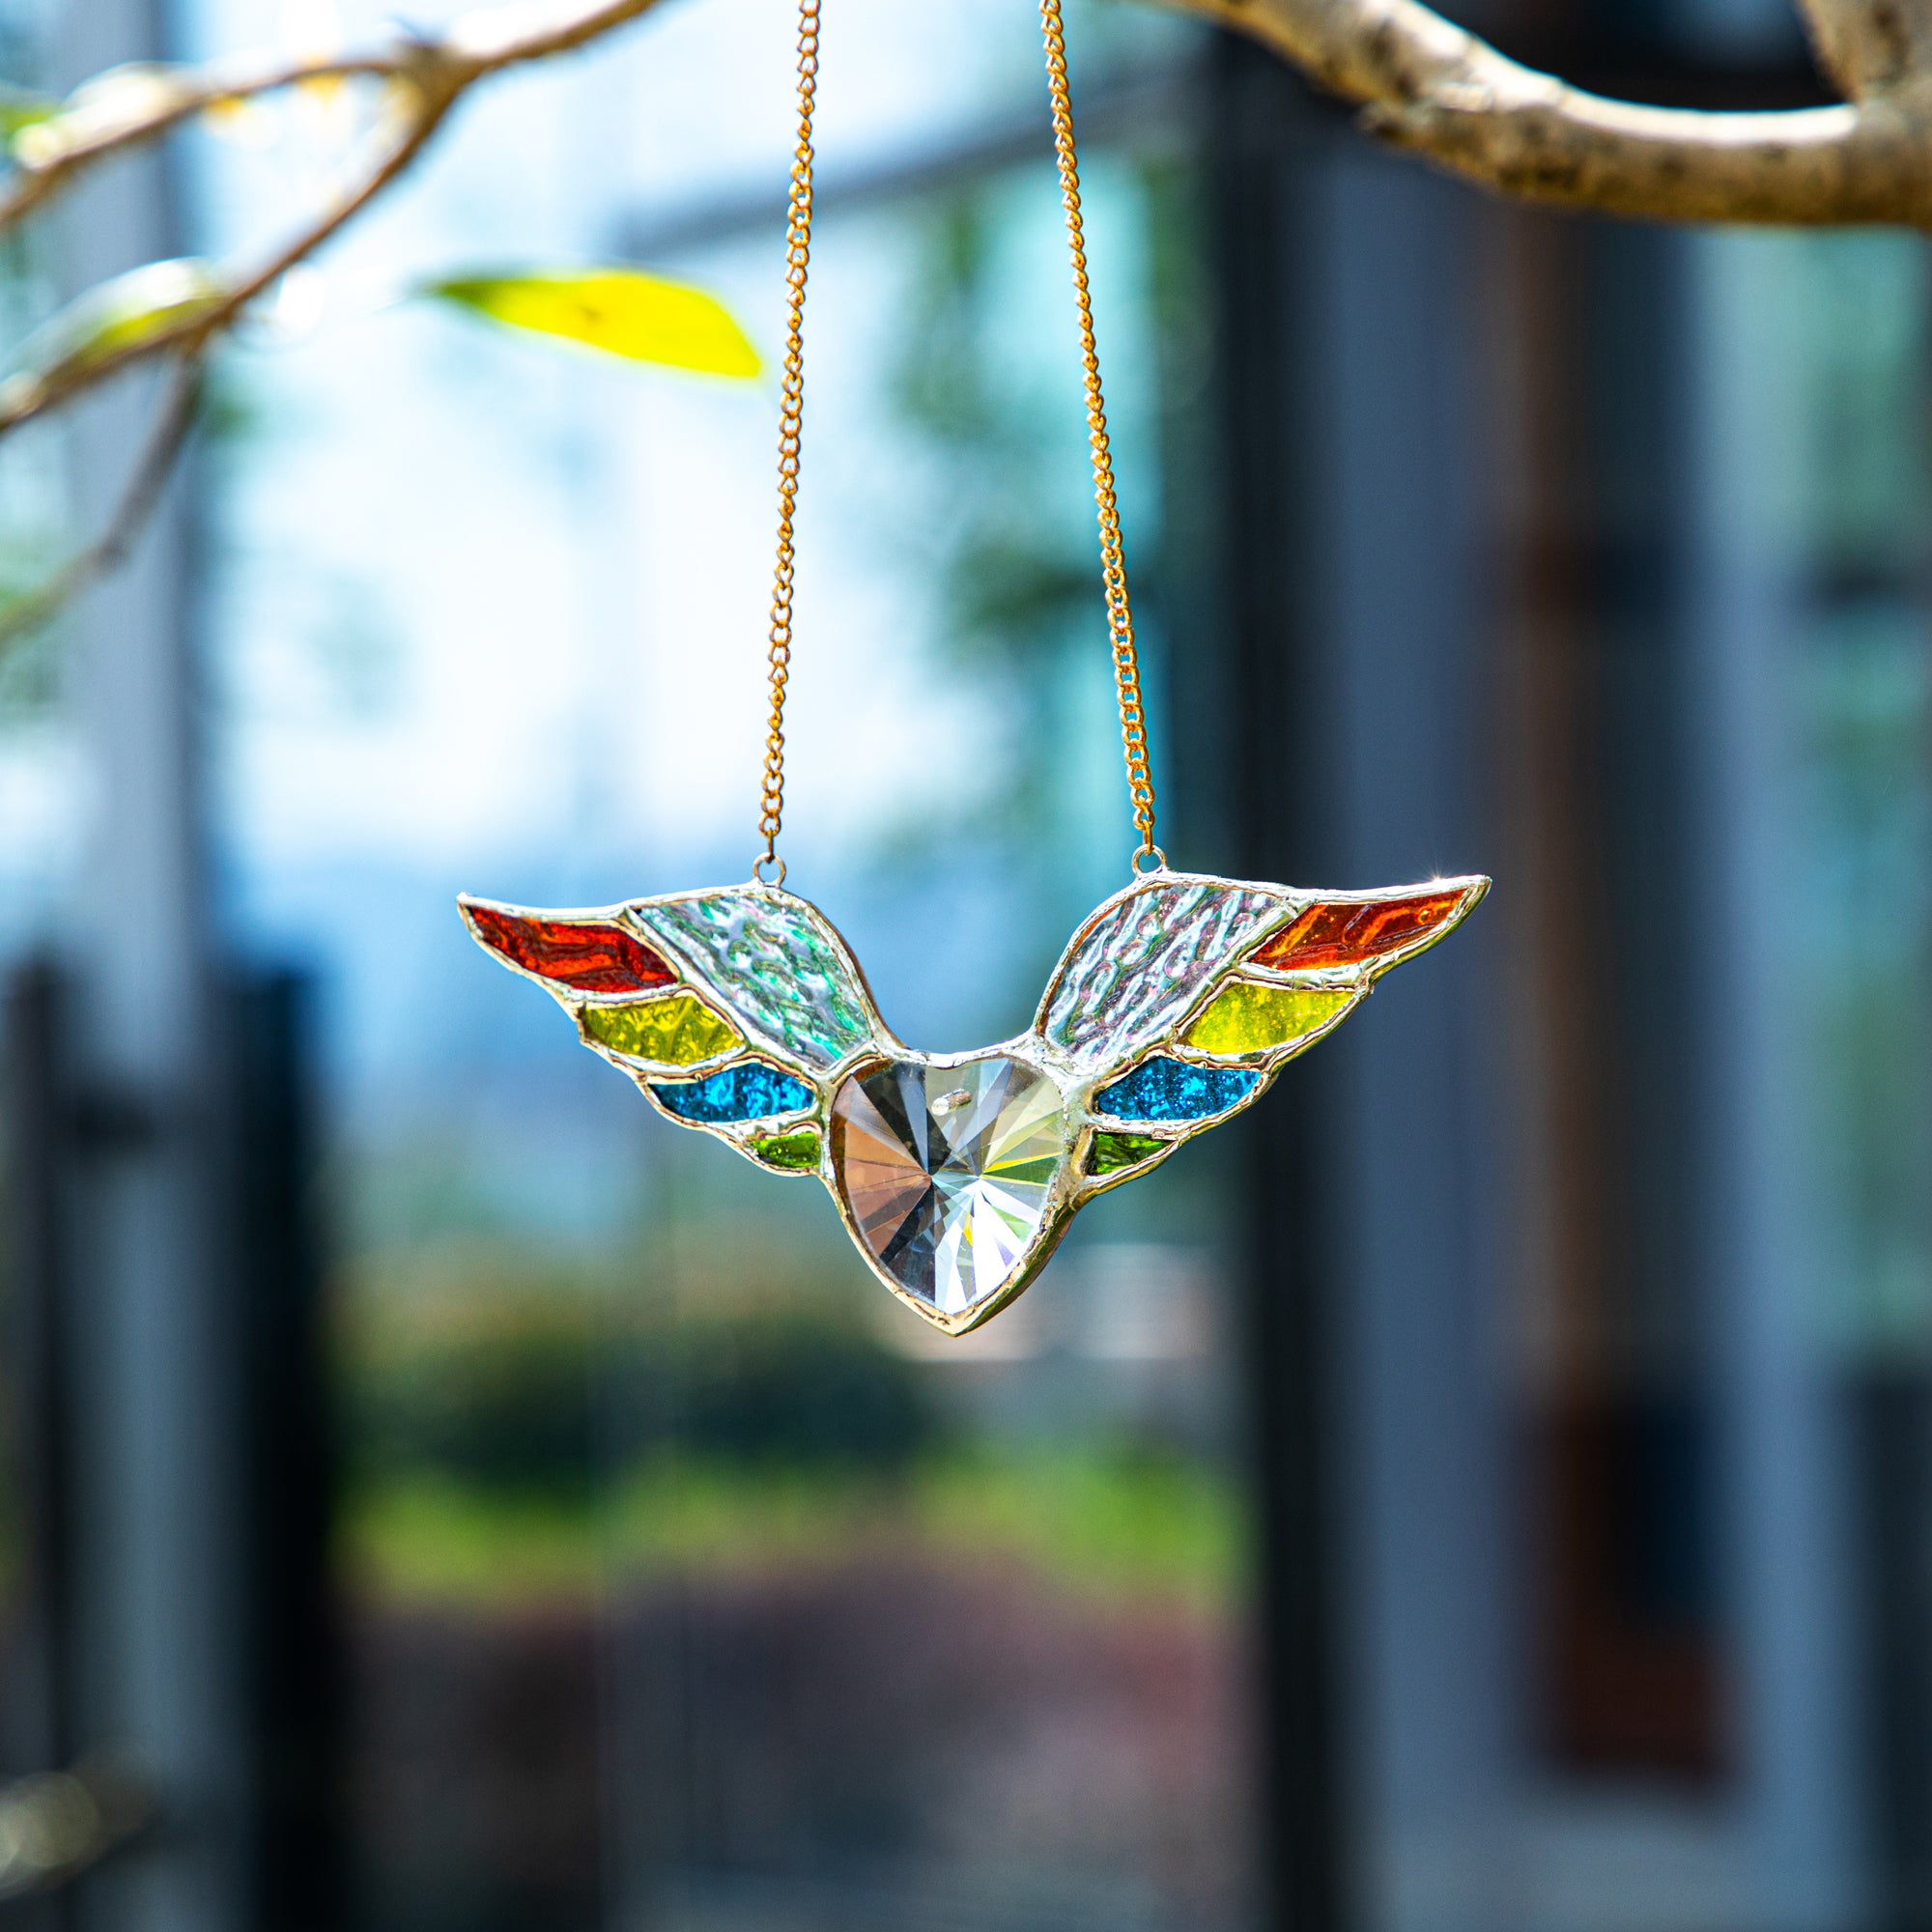 Stained Glass Colorful Angel Wings with Crystal Heart Shaped Prism Suncatcher for Window Hanging or Wall Decor, Unique Gift